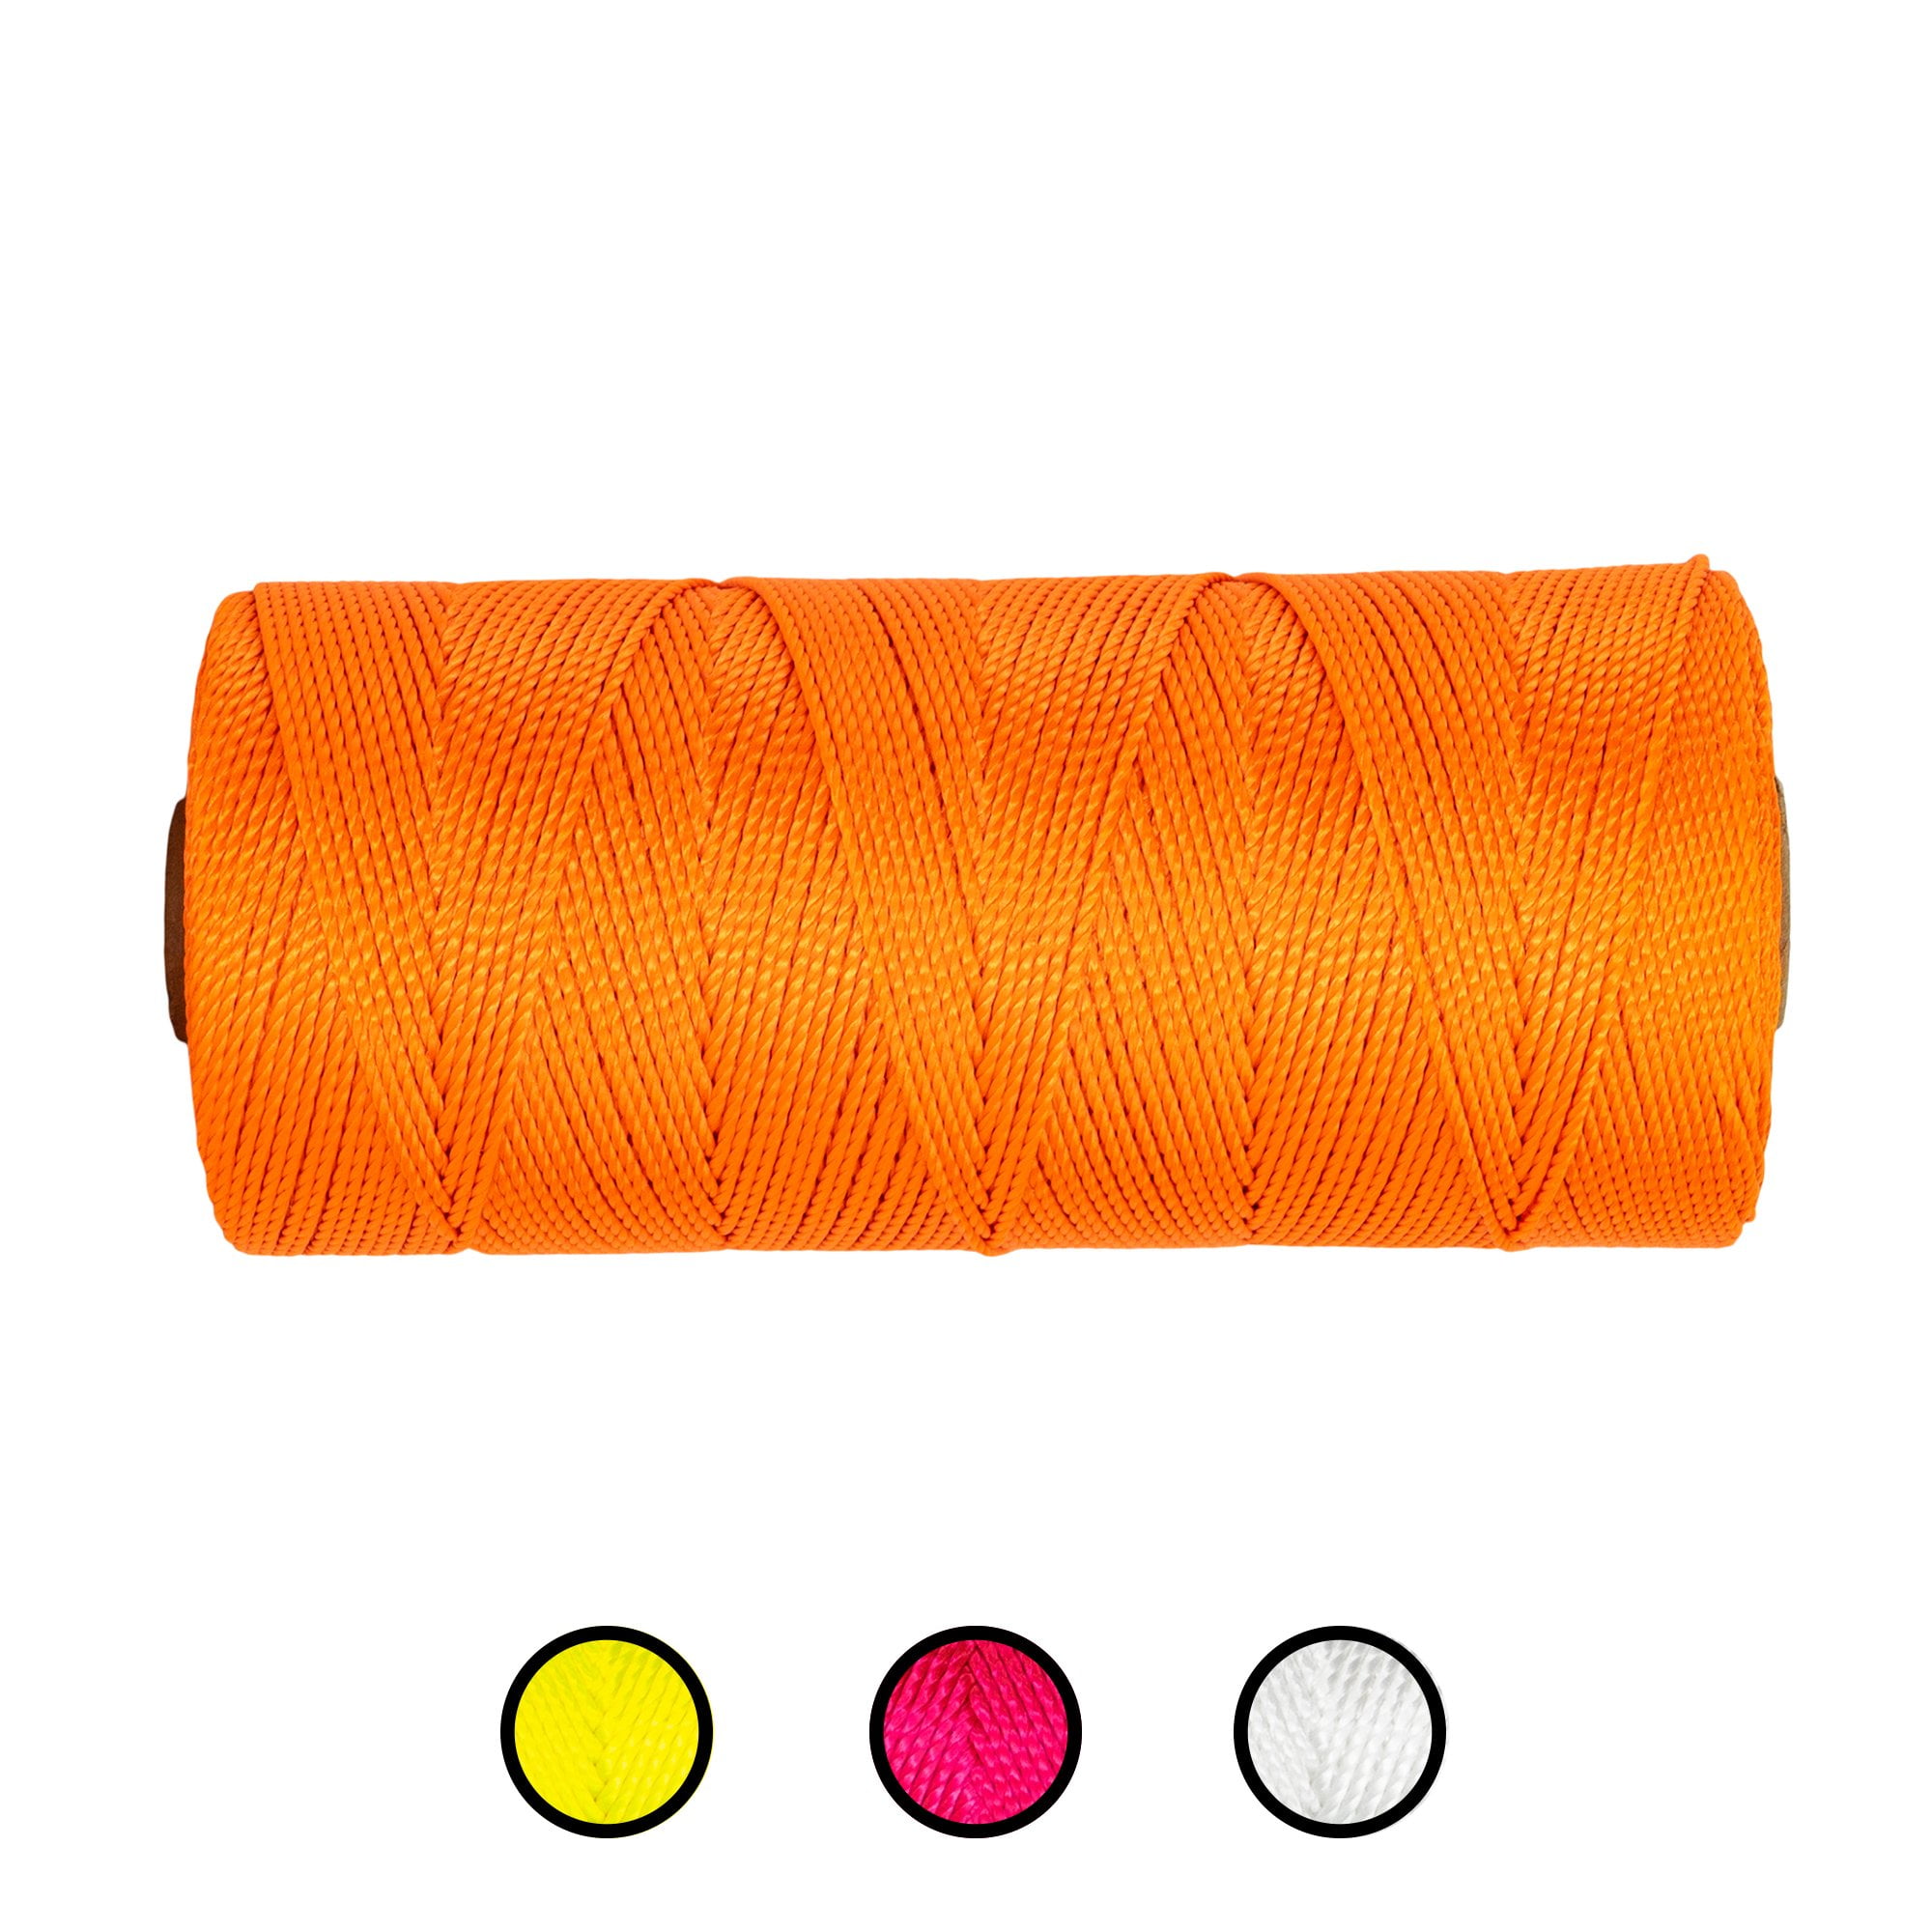 Twisted Nylon Line Twine String Cord for Gardening Marking DIY Projects Crafting Masonry Brown, 1.5mm-328 feet 